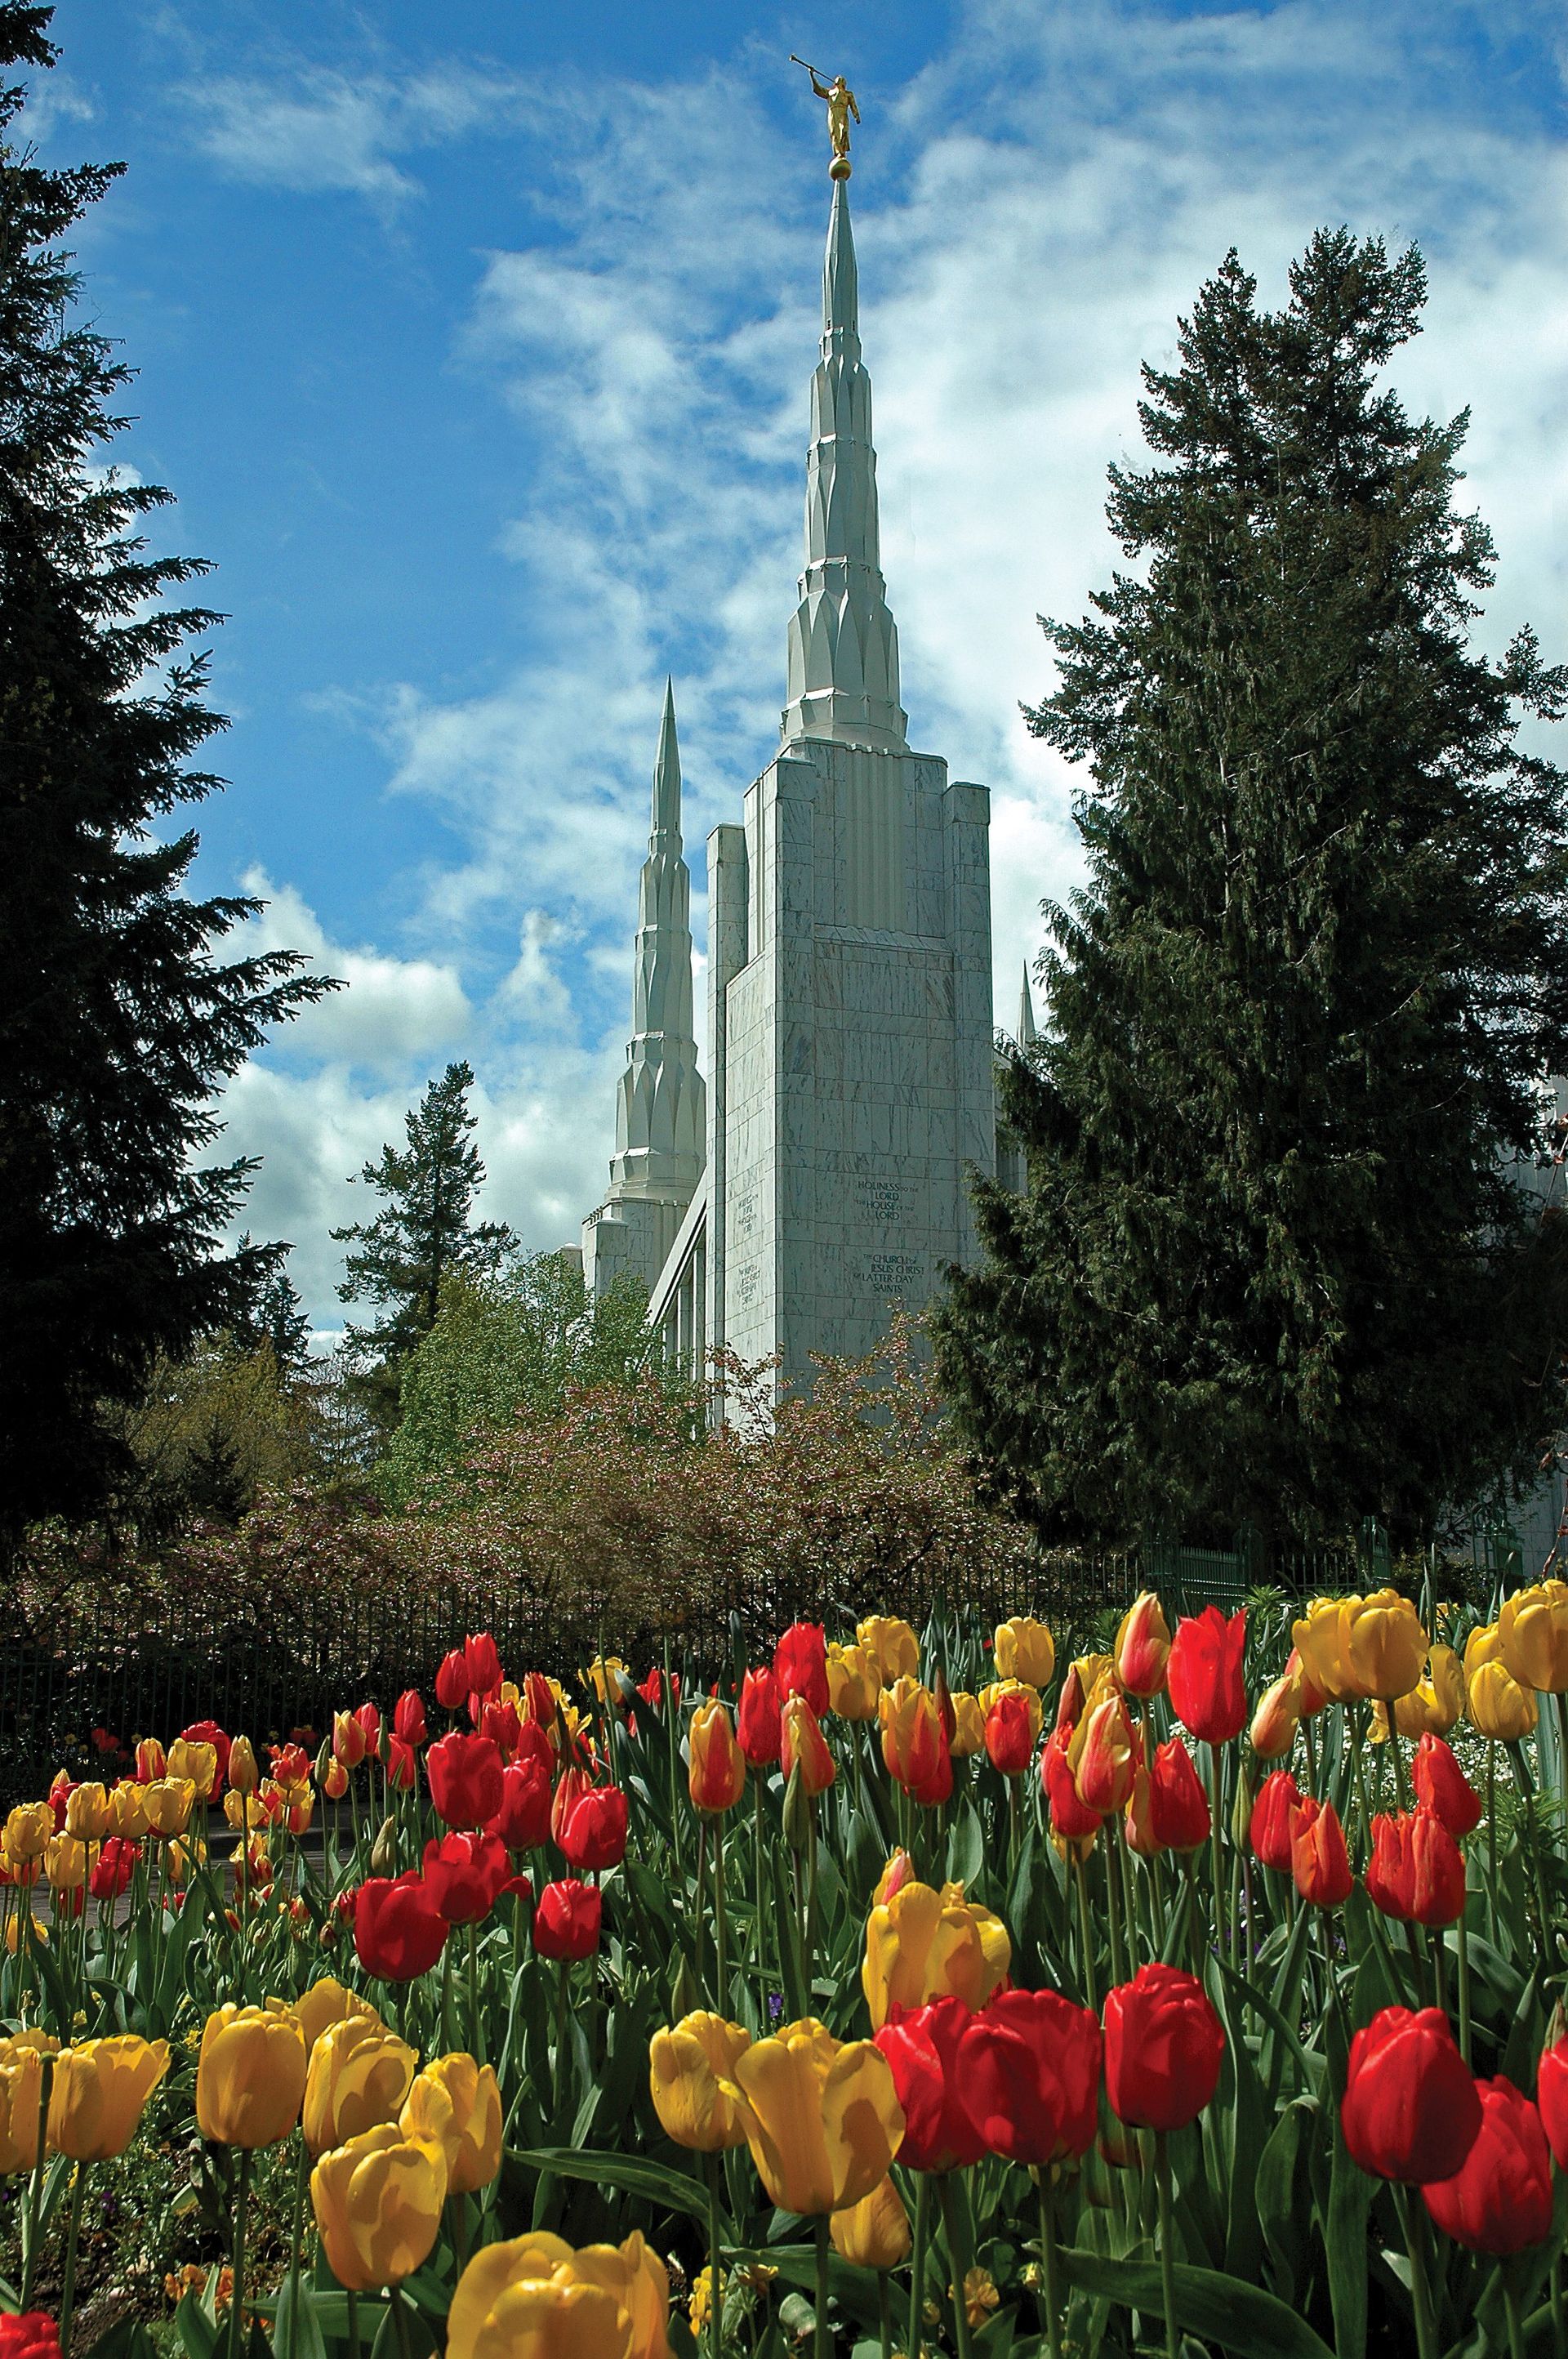 The Portland Oregon Temple spires, including scenery.